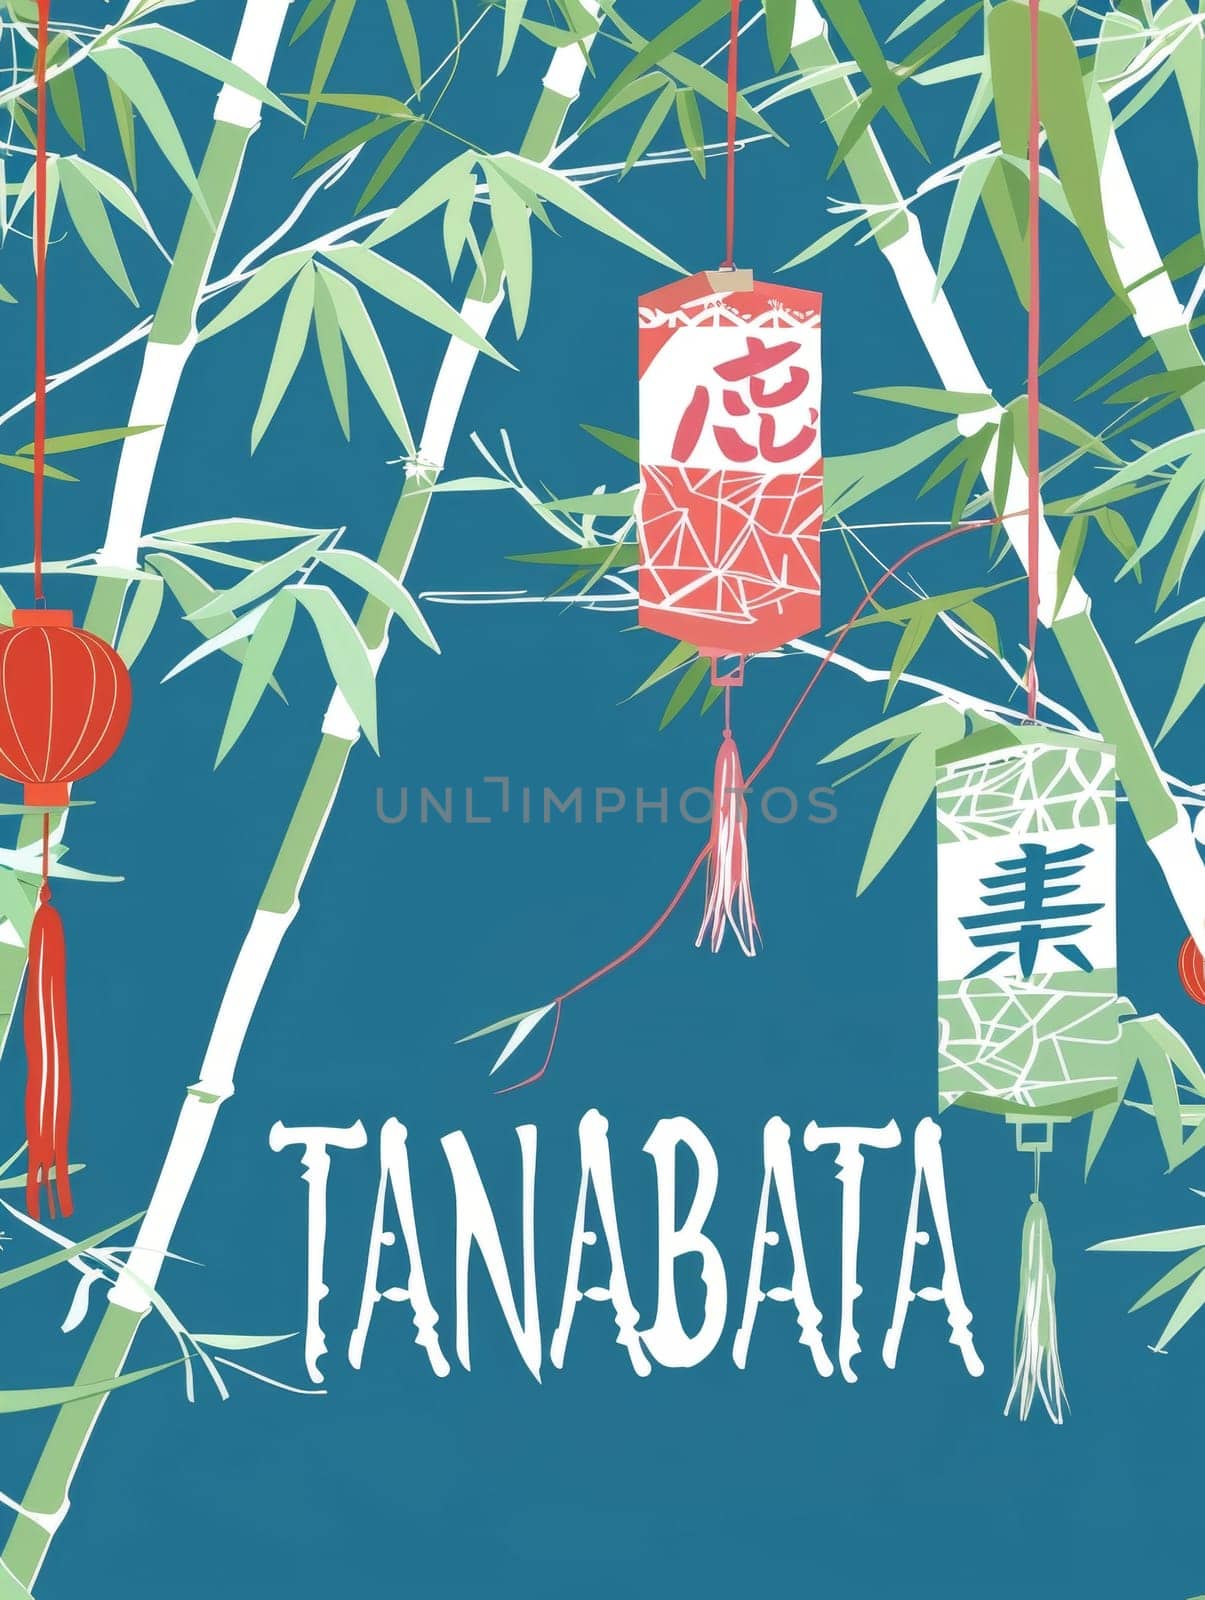 Artistic representation of Tanabata with Japanese kanji on hanging lanterns, surrounded by bamboo leaves against a night sky. by sfinks